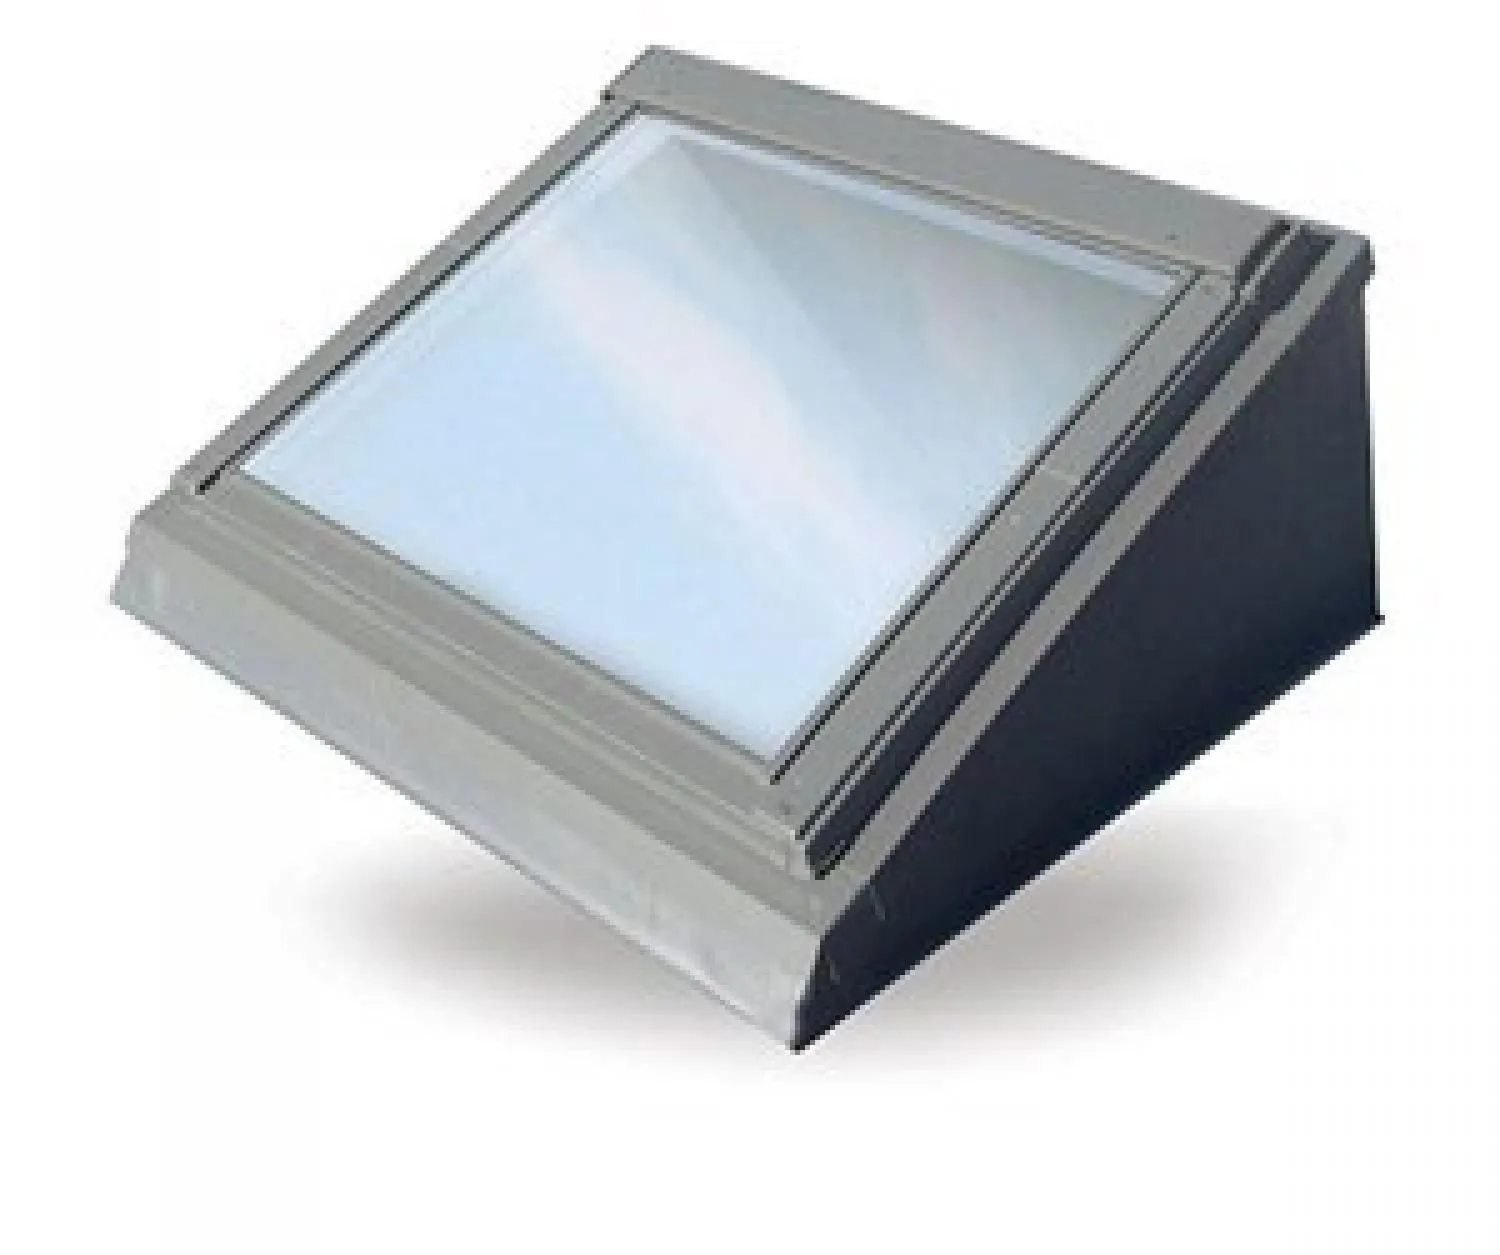 Keylite Combi Flat Roof System flashing for 2 windows 550 x 980mm  CFRSF022018